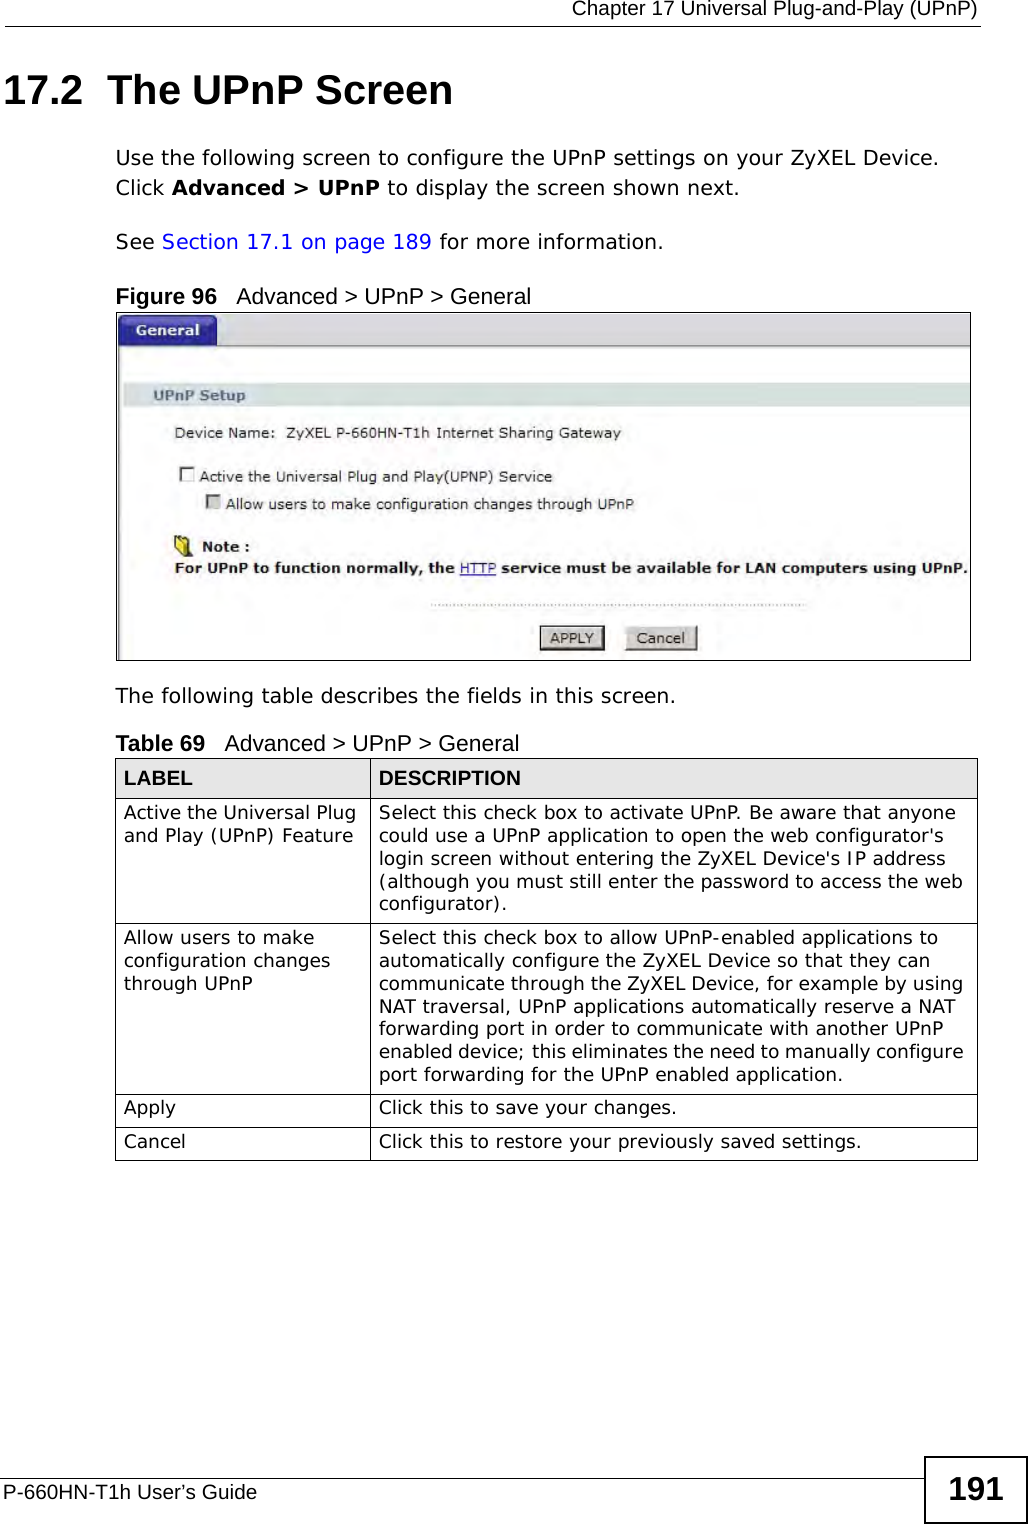  Chapter 17 Universal Plug-and-Play (UPnP)P-660HN-T1h User’s Guide 19117.2  The UPnP ScreenUse the following screen to configure the UPnP settings on your ZyXEL Device. Click Advanced &gt; UPnP to display the screen shown next.See Section 17.1 on page 189 for more information. Figure 96   Advanced &gt; UPnP &gt; GeneralThe following table describes the fields in this screen. Table 69   Advanced &gt; UPnP &gt; GeneralLABEL DESCRIPTIONActive the Universal Plug and Play (UPnP) Feature Select this check box to activate UPnP. Be aware that anyone could use a UPnP application to open the web configurator&apos;s login screen without entering the ZyXEL Device&apos;s IP address (although you must still enter the password to access the web configurator).Allow users to make configuration changes through UPnPSelect this check box to allow UPnP-enabled applications to automatically configure the ZyXEL Device so that they can communicate through the ZyXEL Device, for example by using NAT traversal, UPnP applications automatically reserve a NAT forwarding port in order to communicate with another UPnP enabled device; this eliminates the need to manually configure port forwarding for the UPnP enabled application. Apply Click this to save your changes.Cancel Click this to restore your previously saved settings.